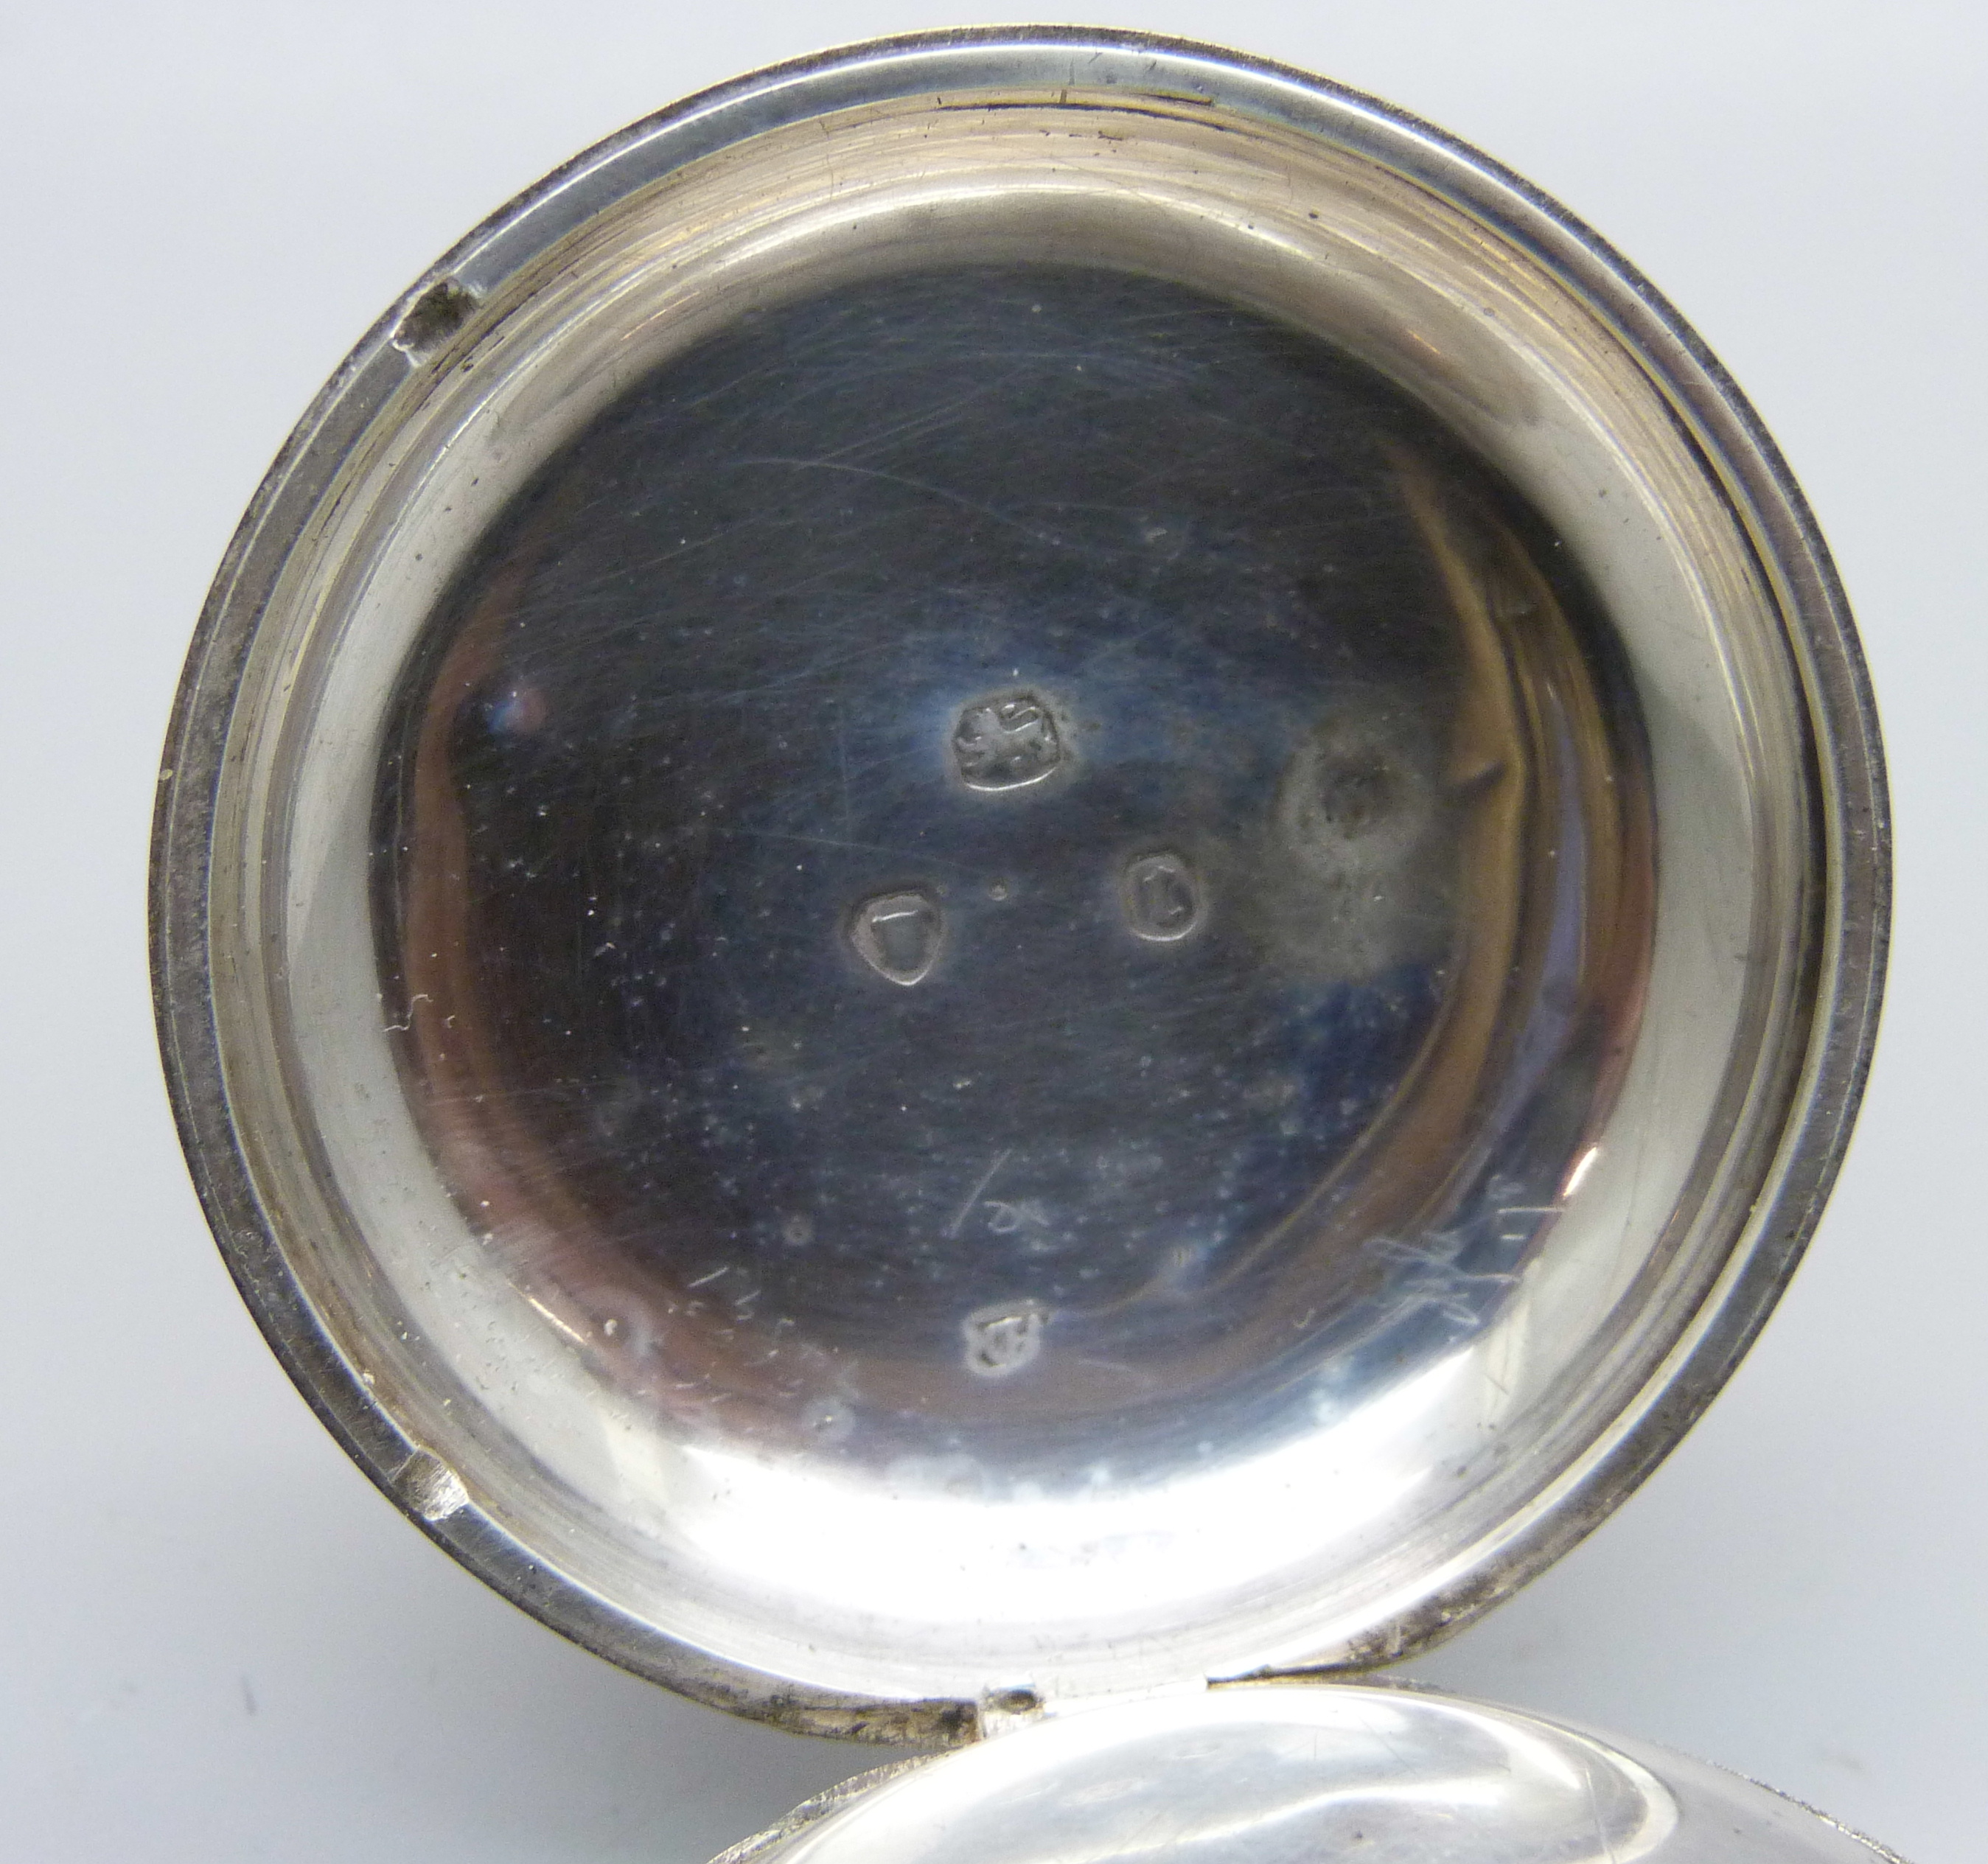 A silver pocket watch with verge fusee movement - Image 4 of 4